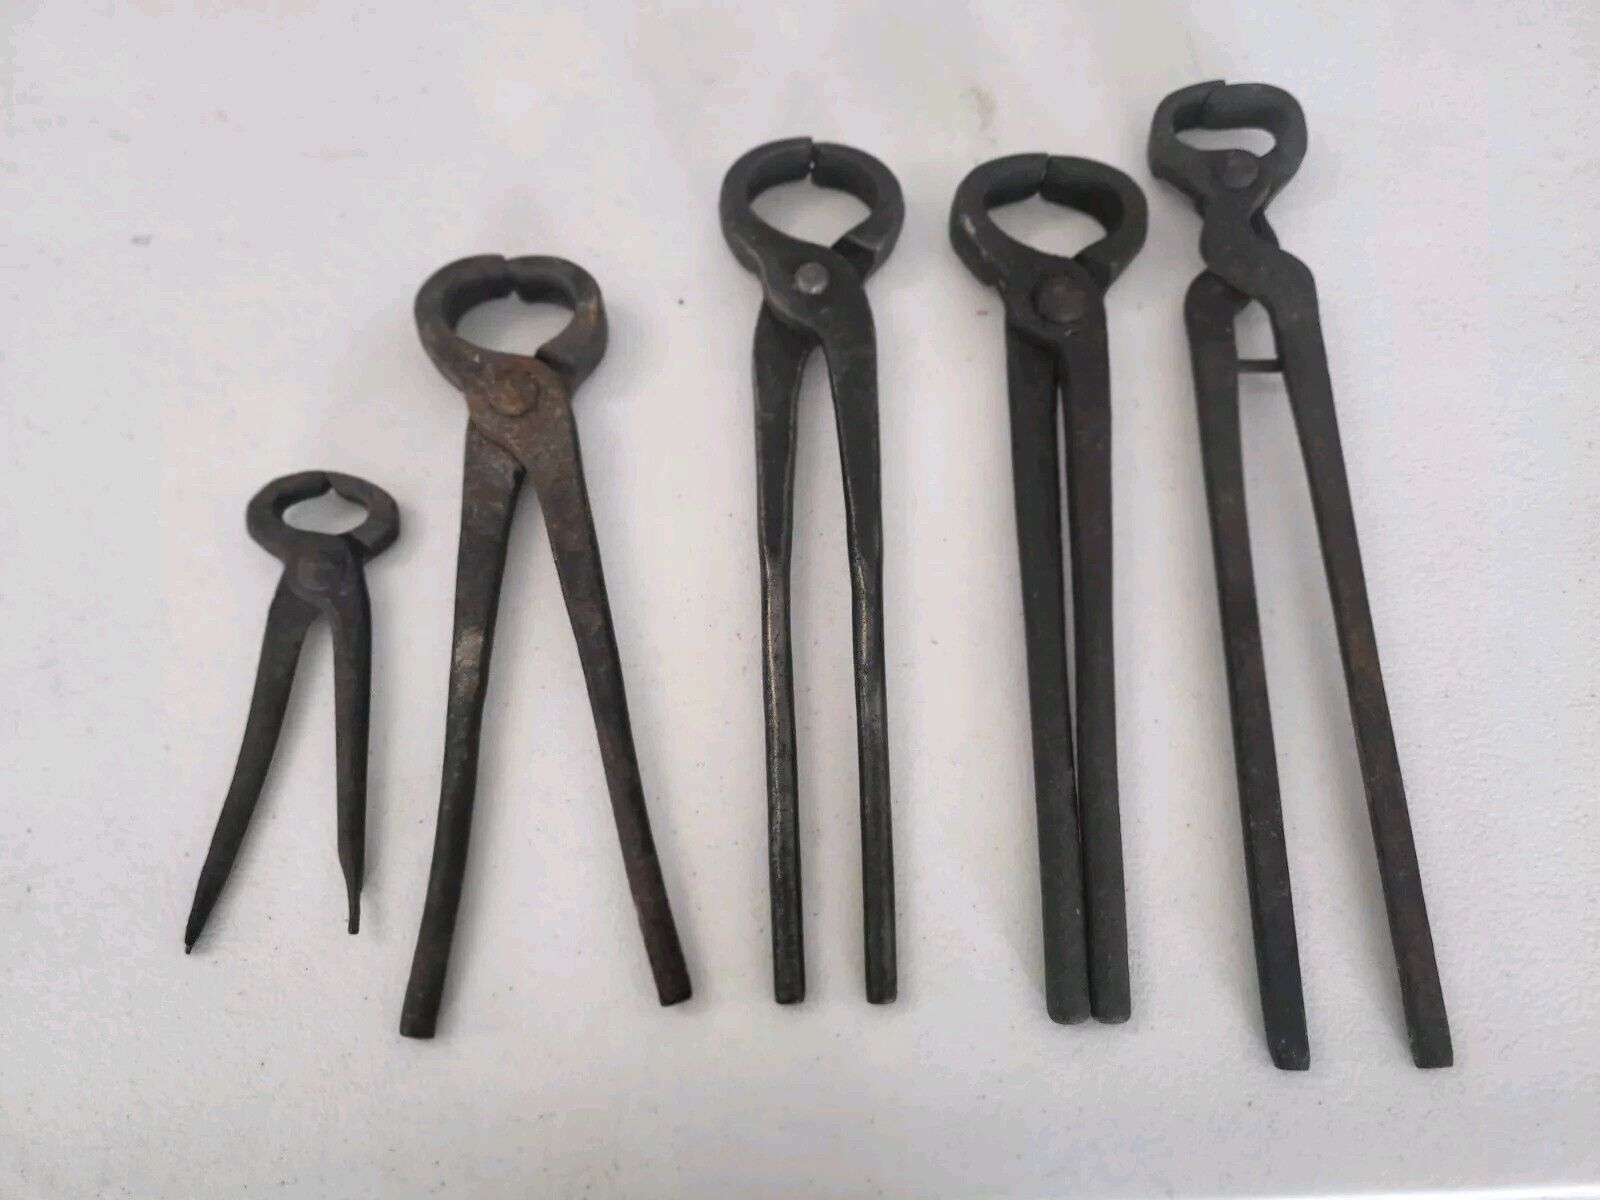 Lot of 5 Vintage Farrier Blacksmith Tool Nippers Tongs 